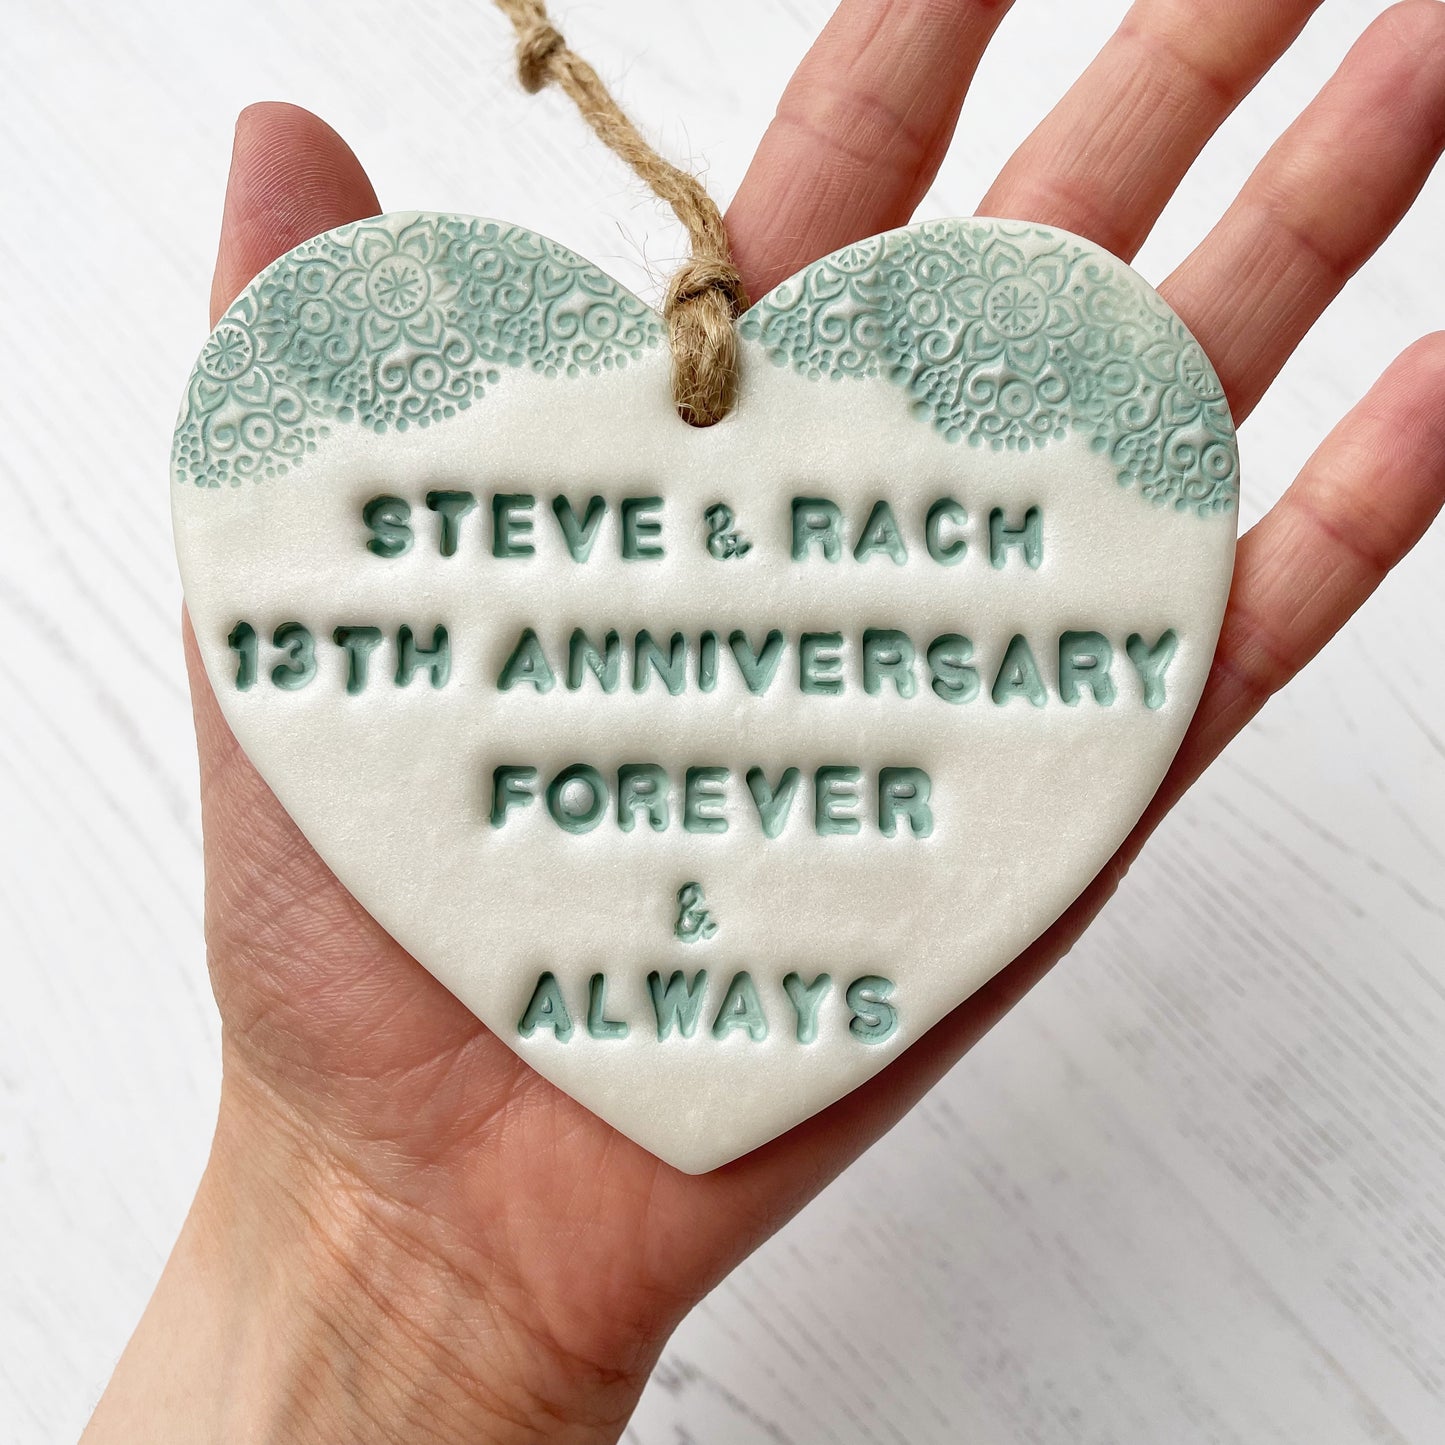 Personalised 13th wedding anniversary gift, pearlised white clay hanging heart with a sage green lace edge at the top of the heart, the heart is personalised with STEVE & RACH 13TH ANNIVERSARY FOREVER & ALWAYS